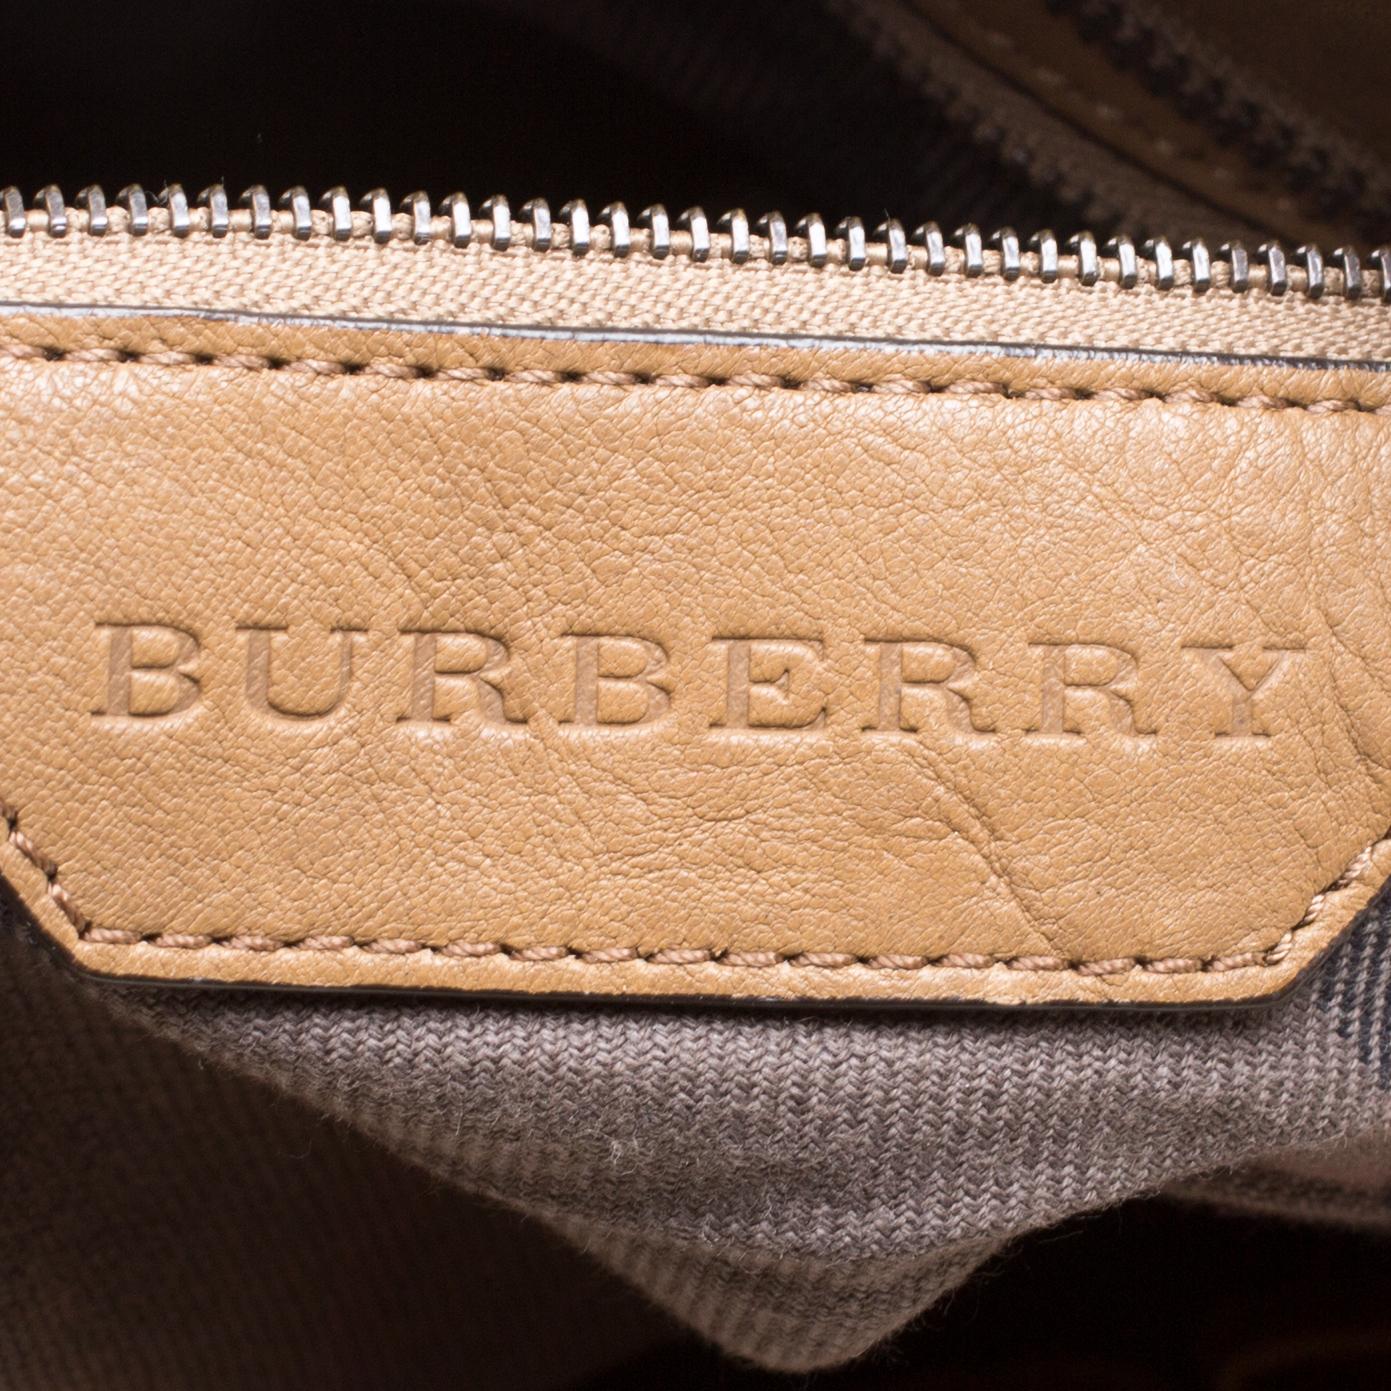 Burberry Brown Quilted Leather Tote 4